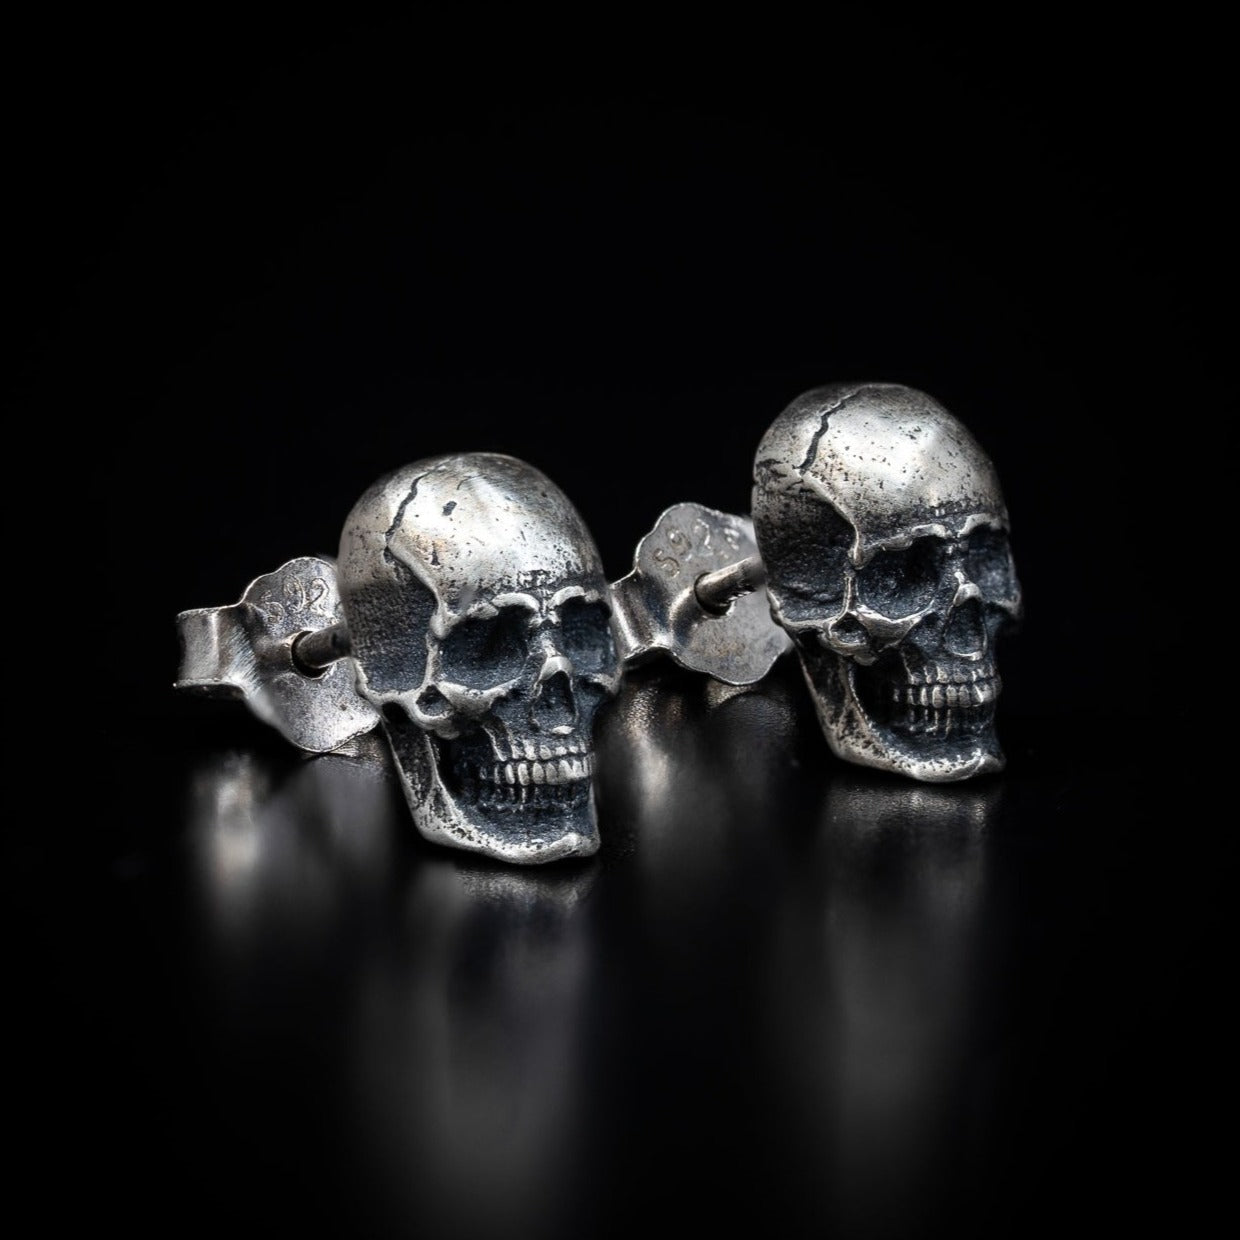 Gothic Skull Stud Earrings in Sterling Silver by Black Feather Design